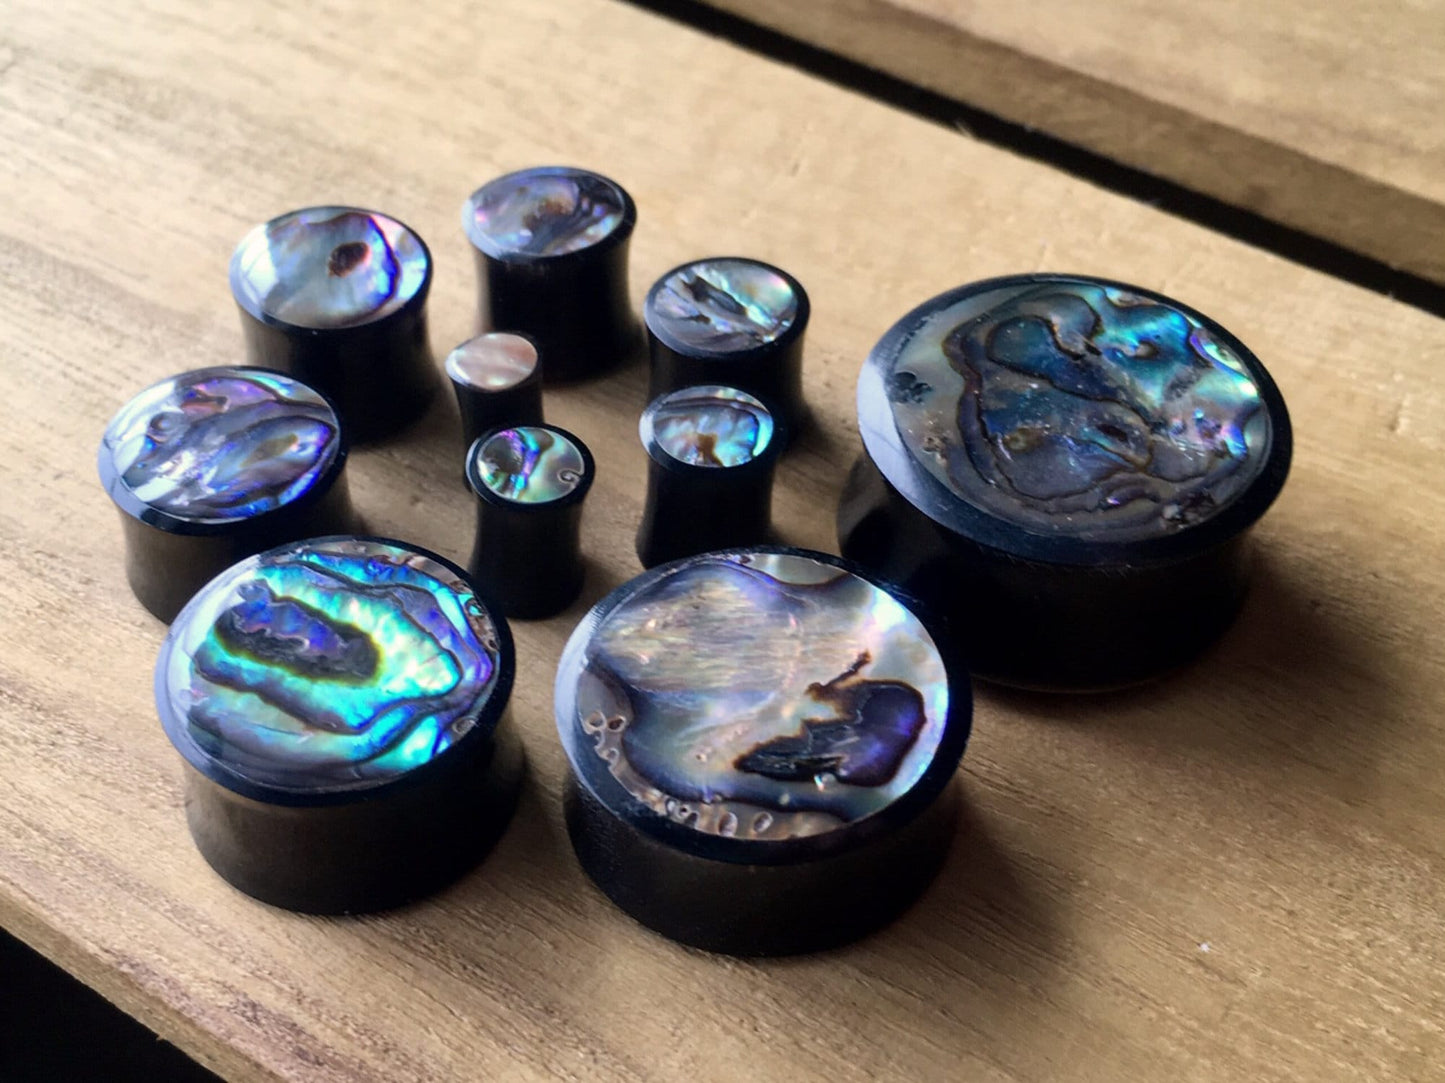 PAIR of Stunning Organic Horn with Abalone Inlay Plugs - Gauges 4g (5mm) up to 1" (25mm) available!